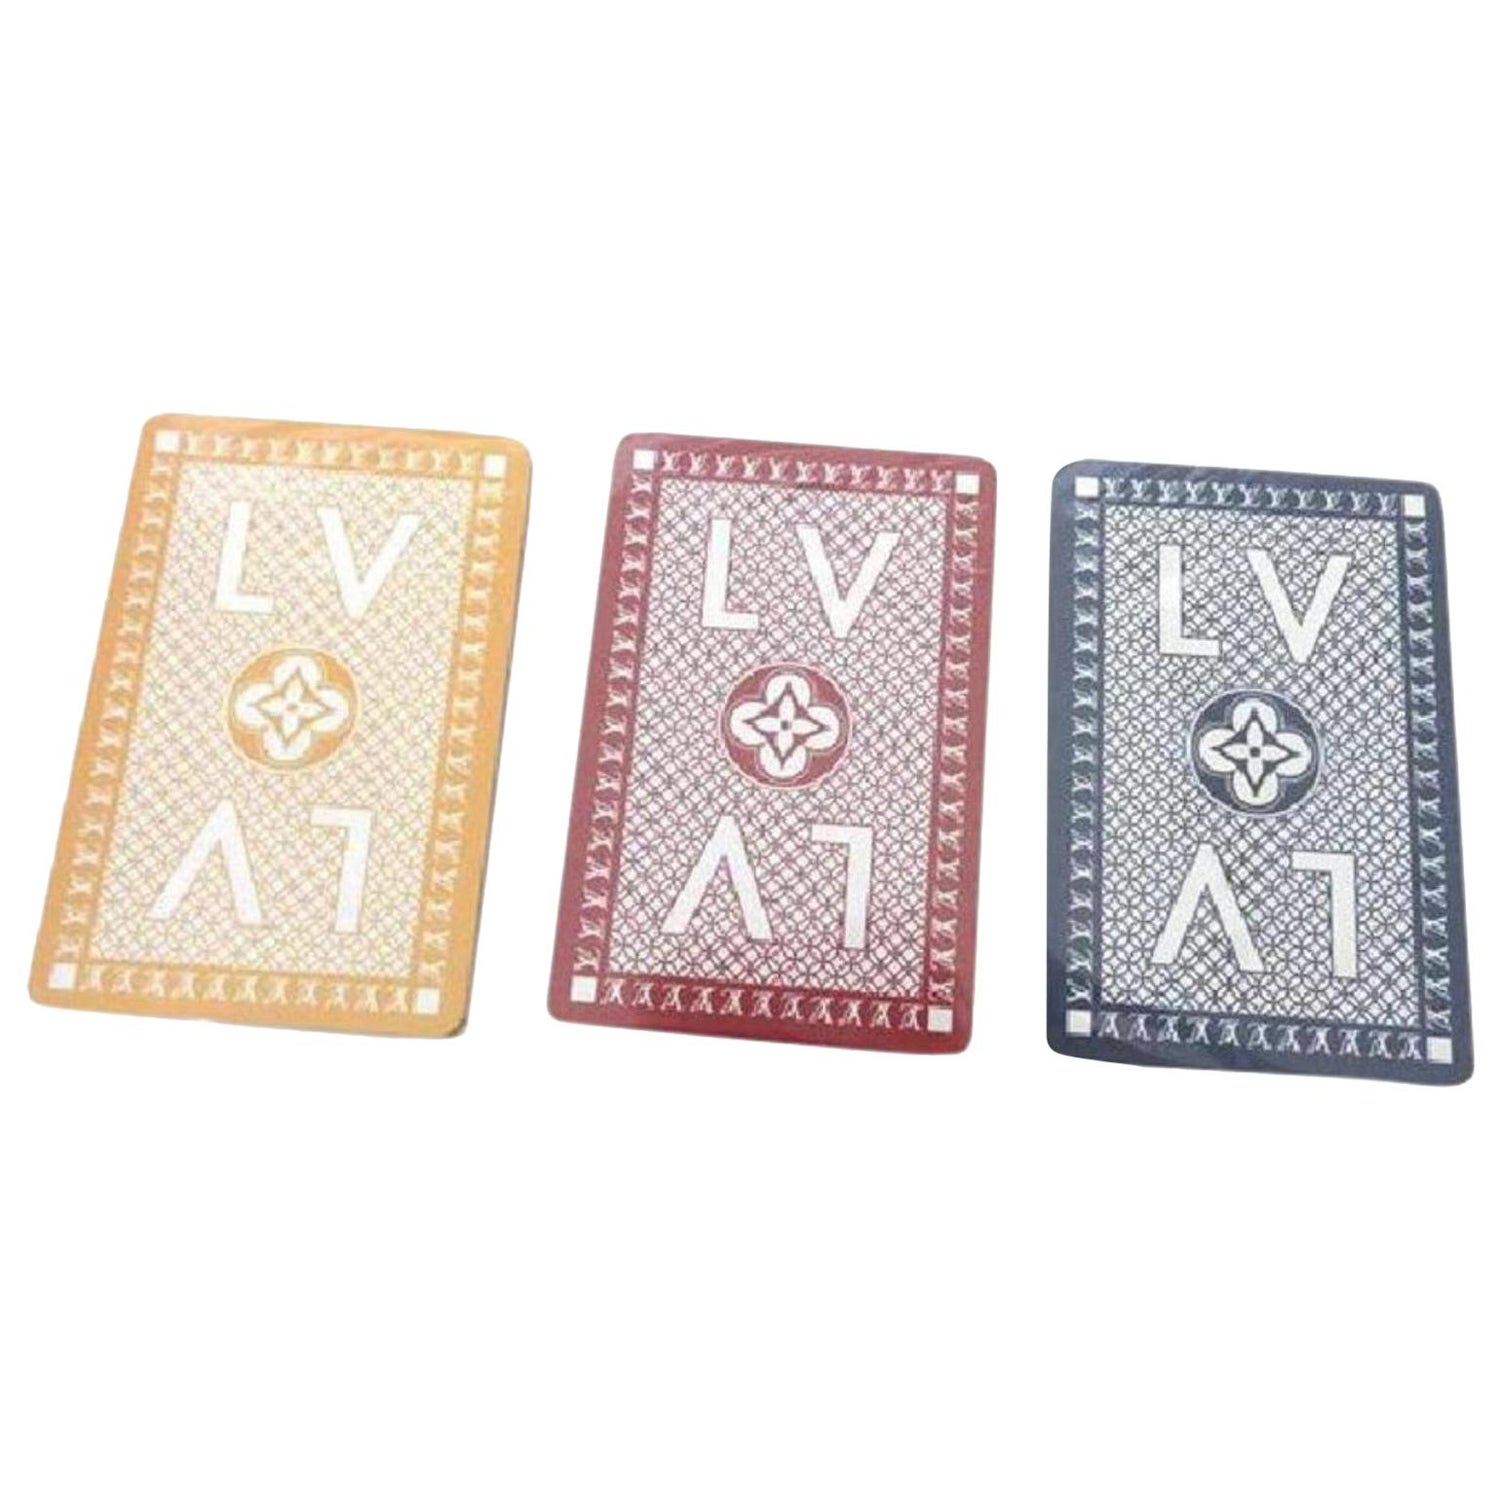 playing cards louis vuitton